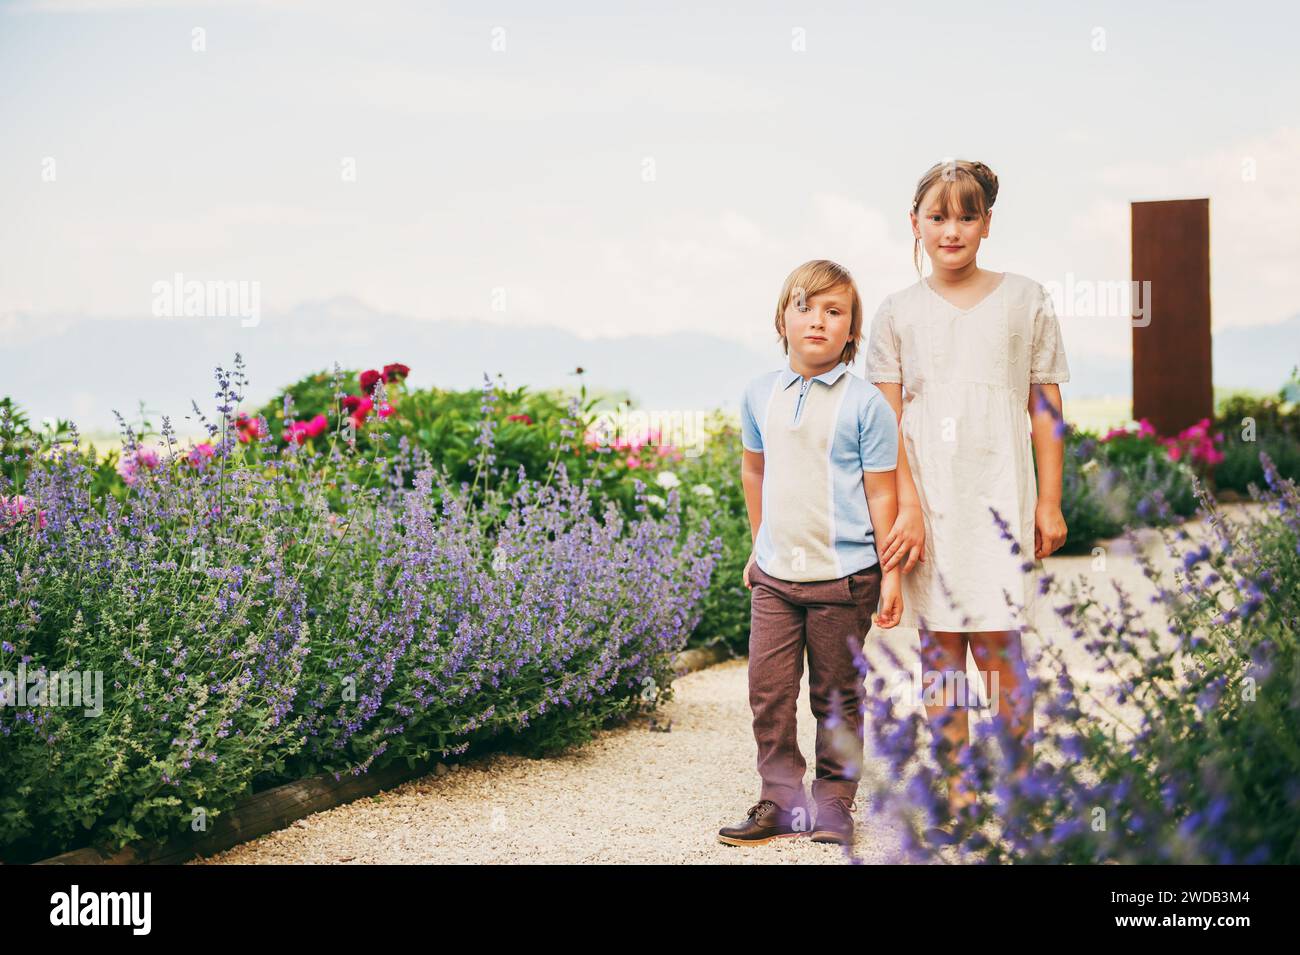 Fashion kids posing in beautiful garden, wearing vintage style clothing. Summer blooming lavender and peonies Stock Photo